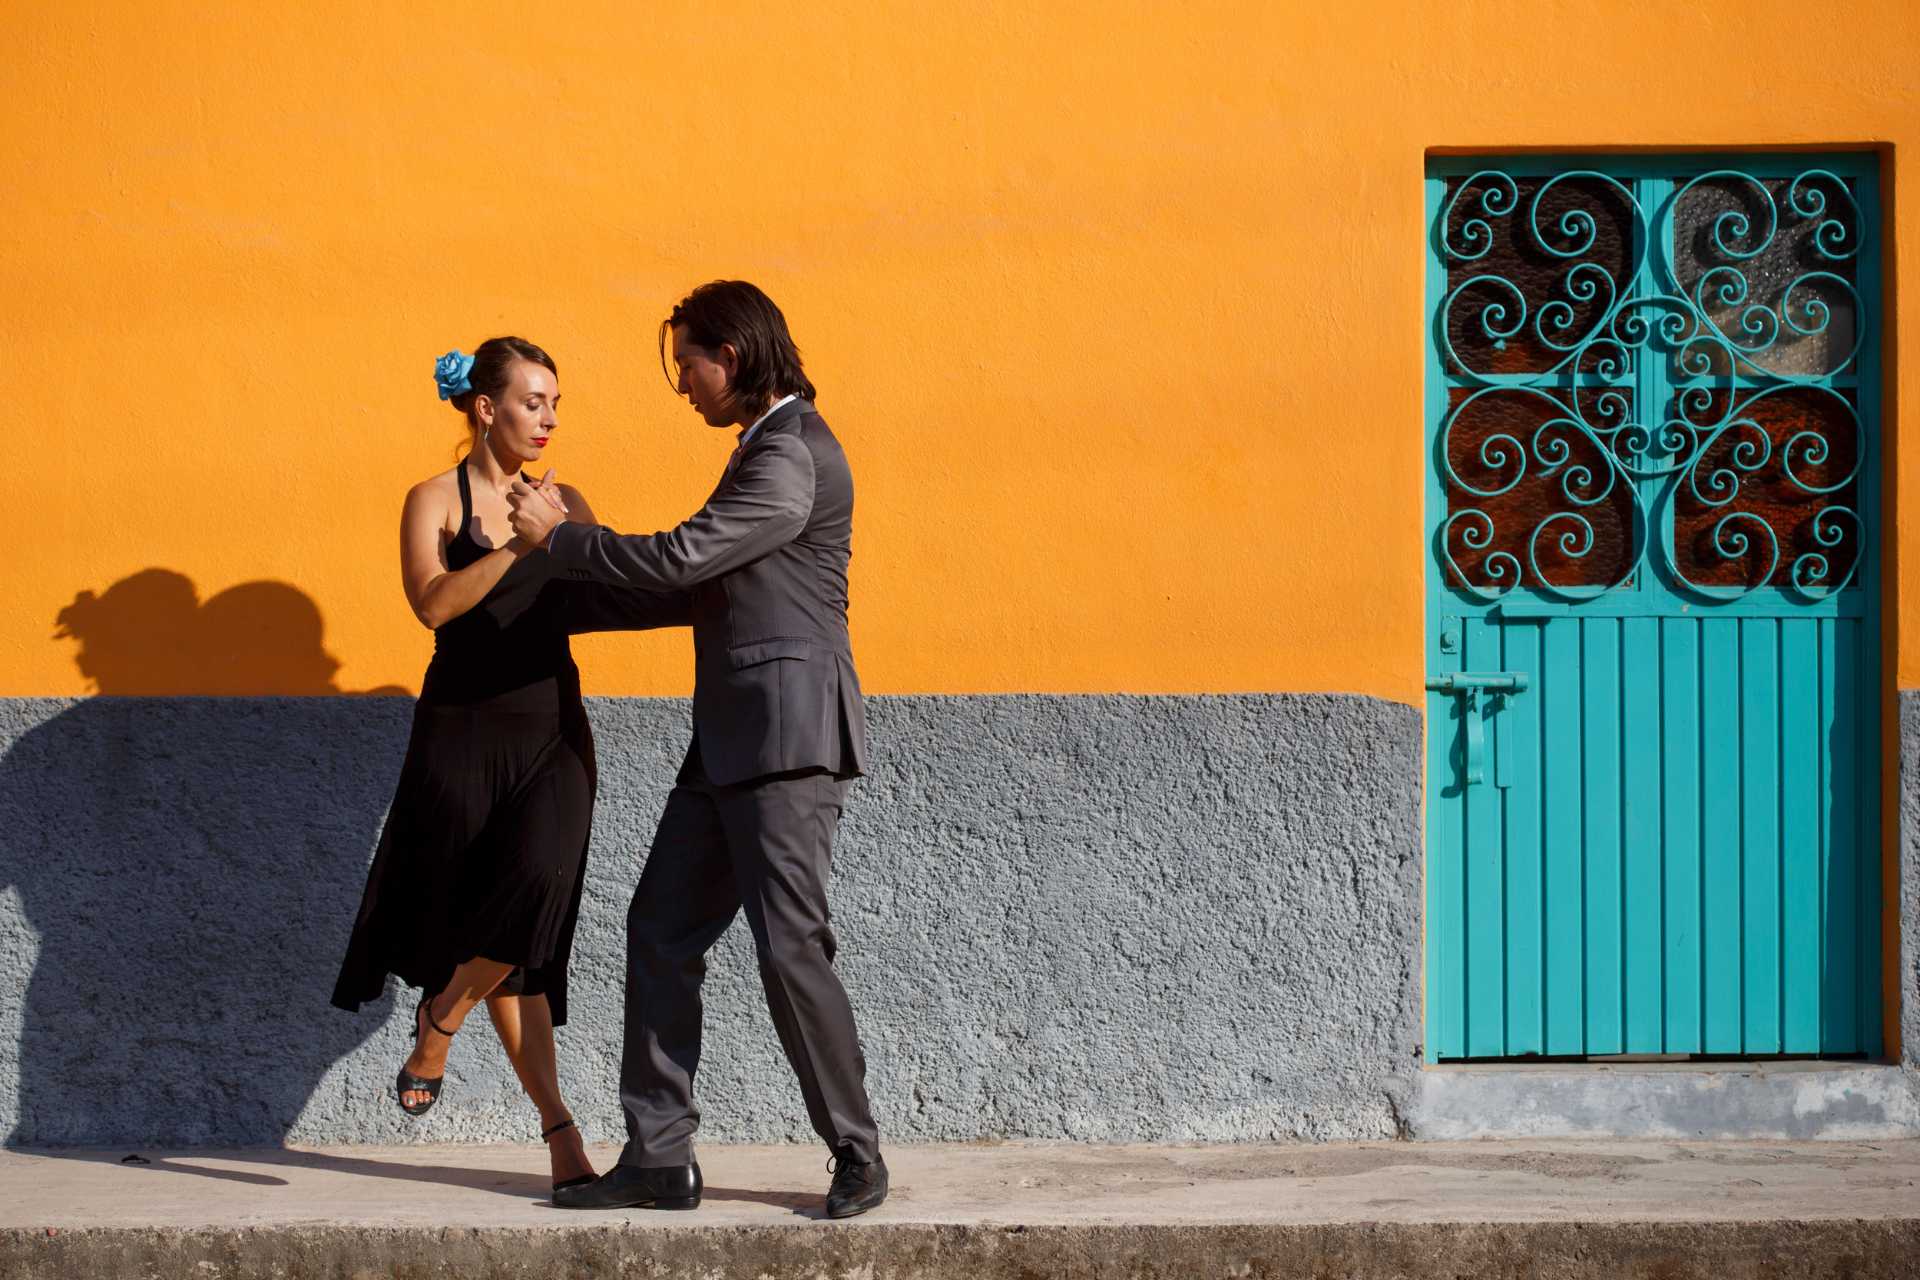 Man and Woman Dancing on the Sidewalk in Argentina